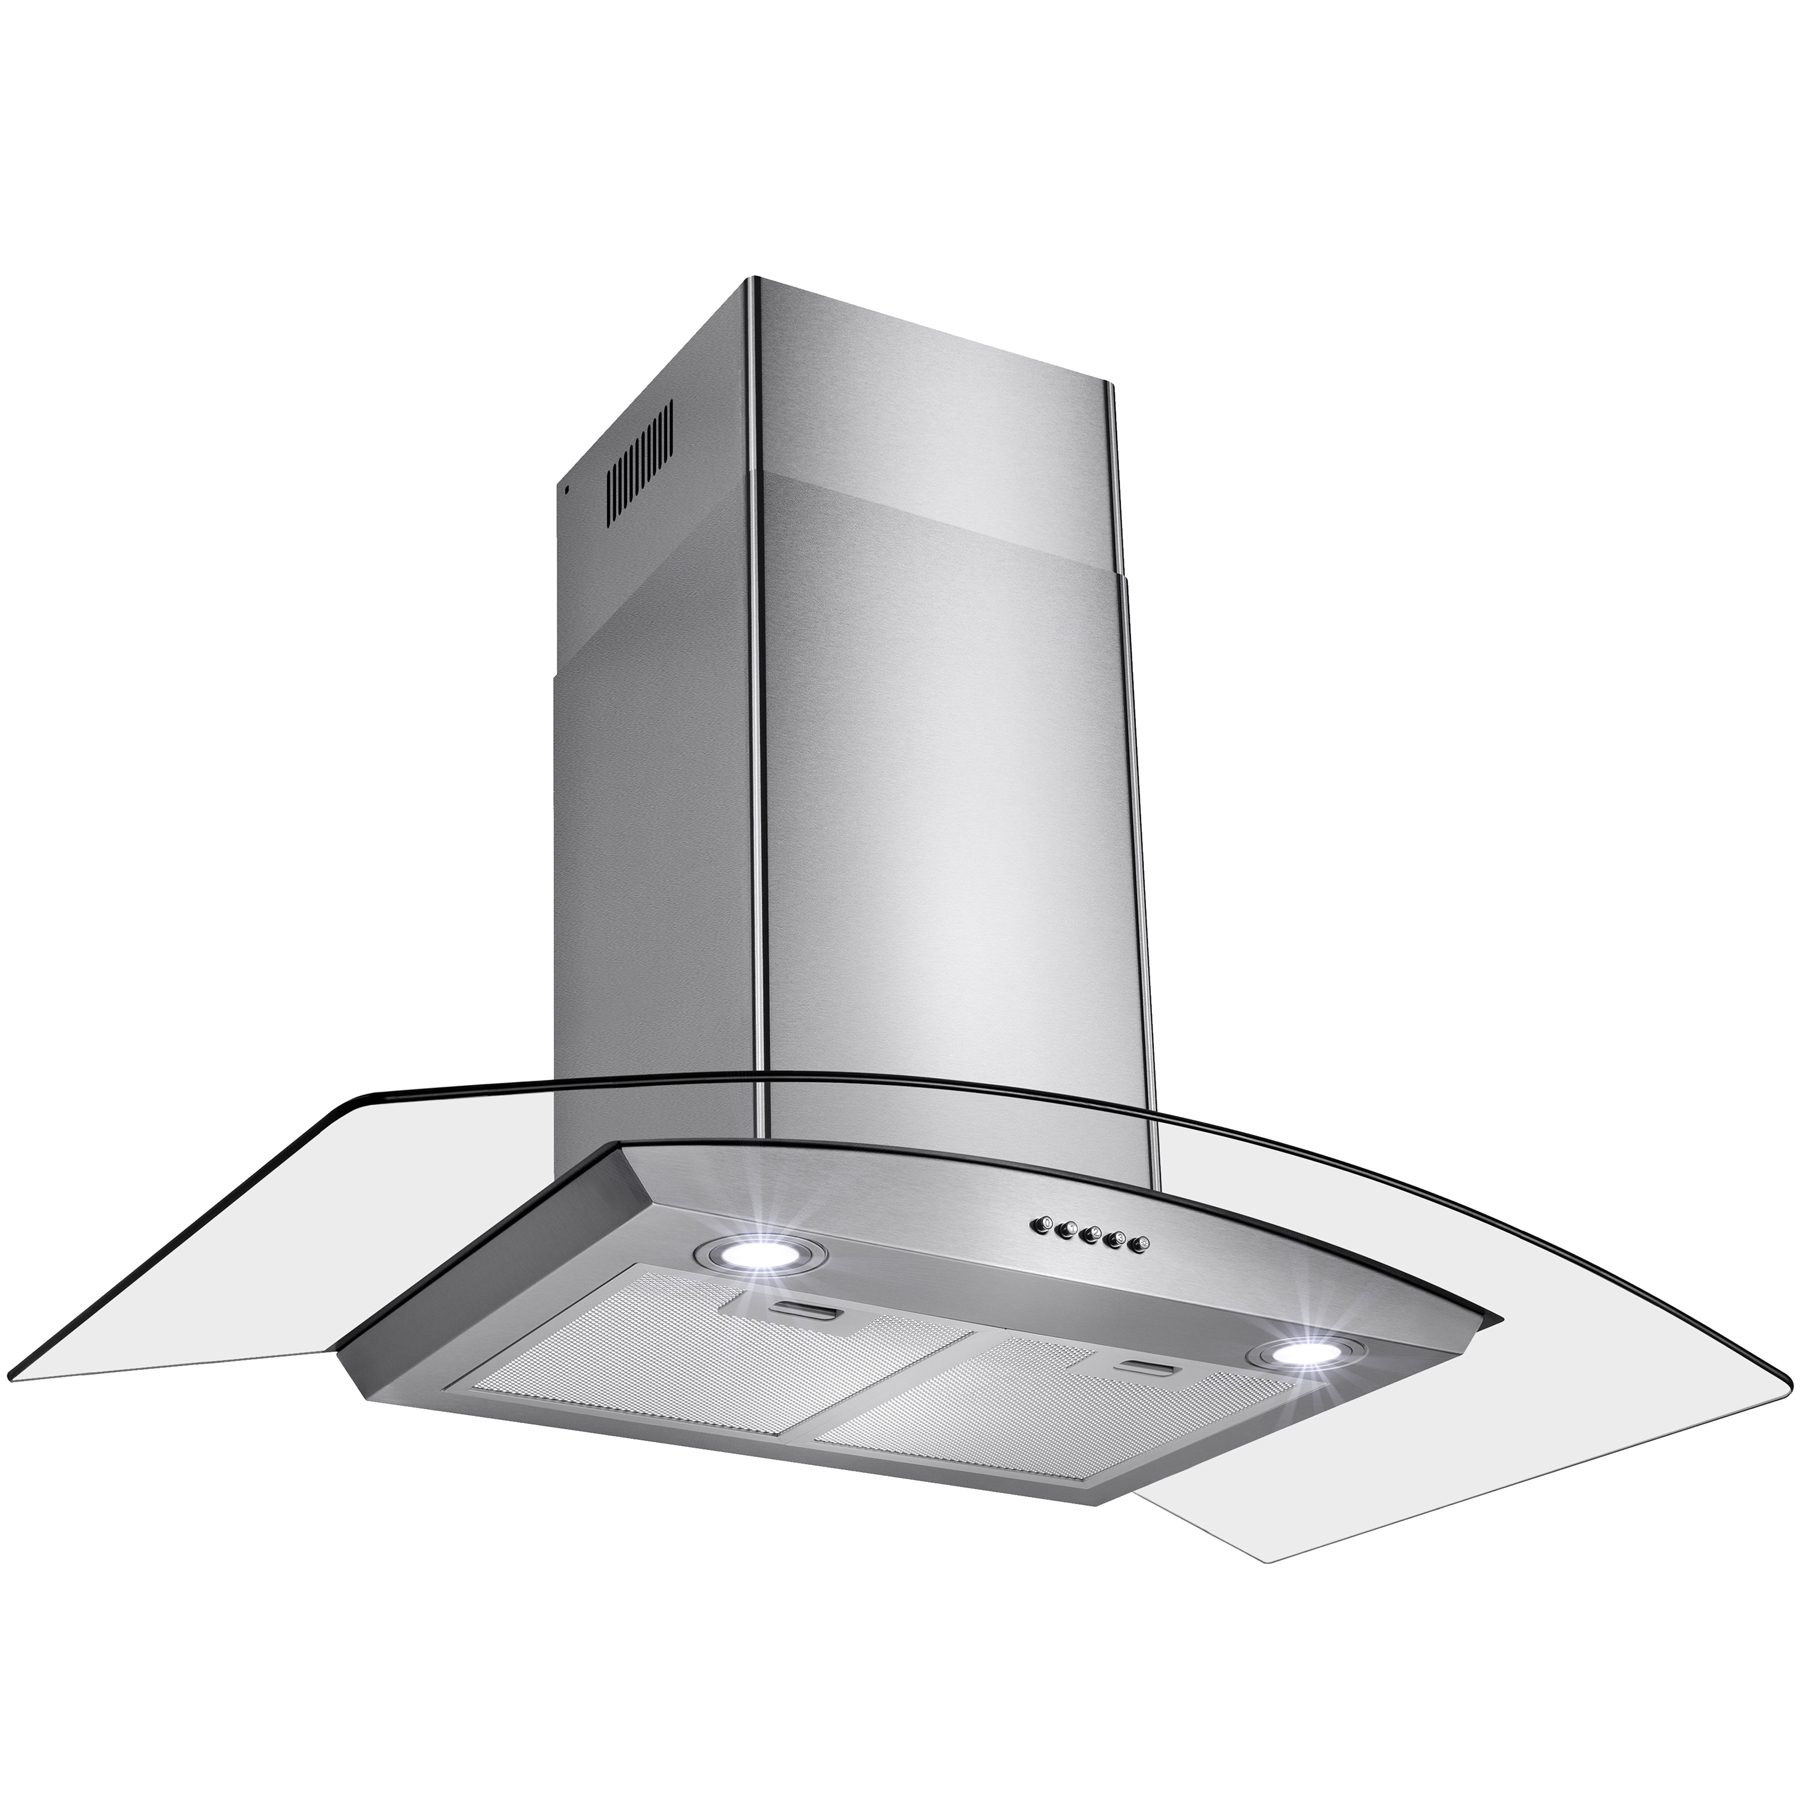 AKDY 36" Stainless Steel Tempered Glass Wall Mount Kitchen Vent Range Hood Push Buttons w/ Mesh Filter LED Lights - image 5 of 14